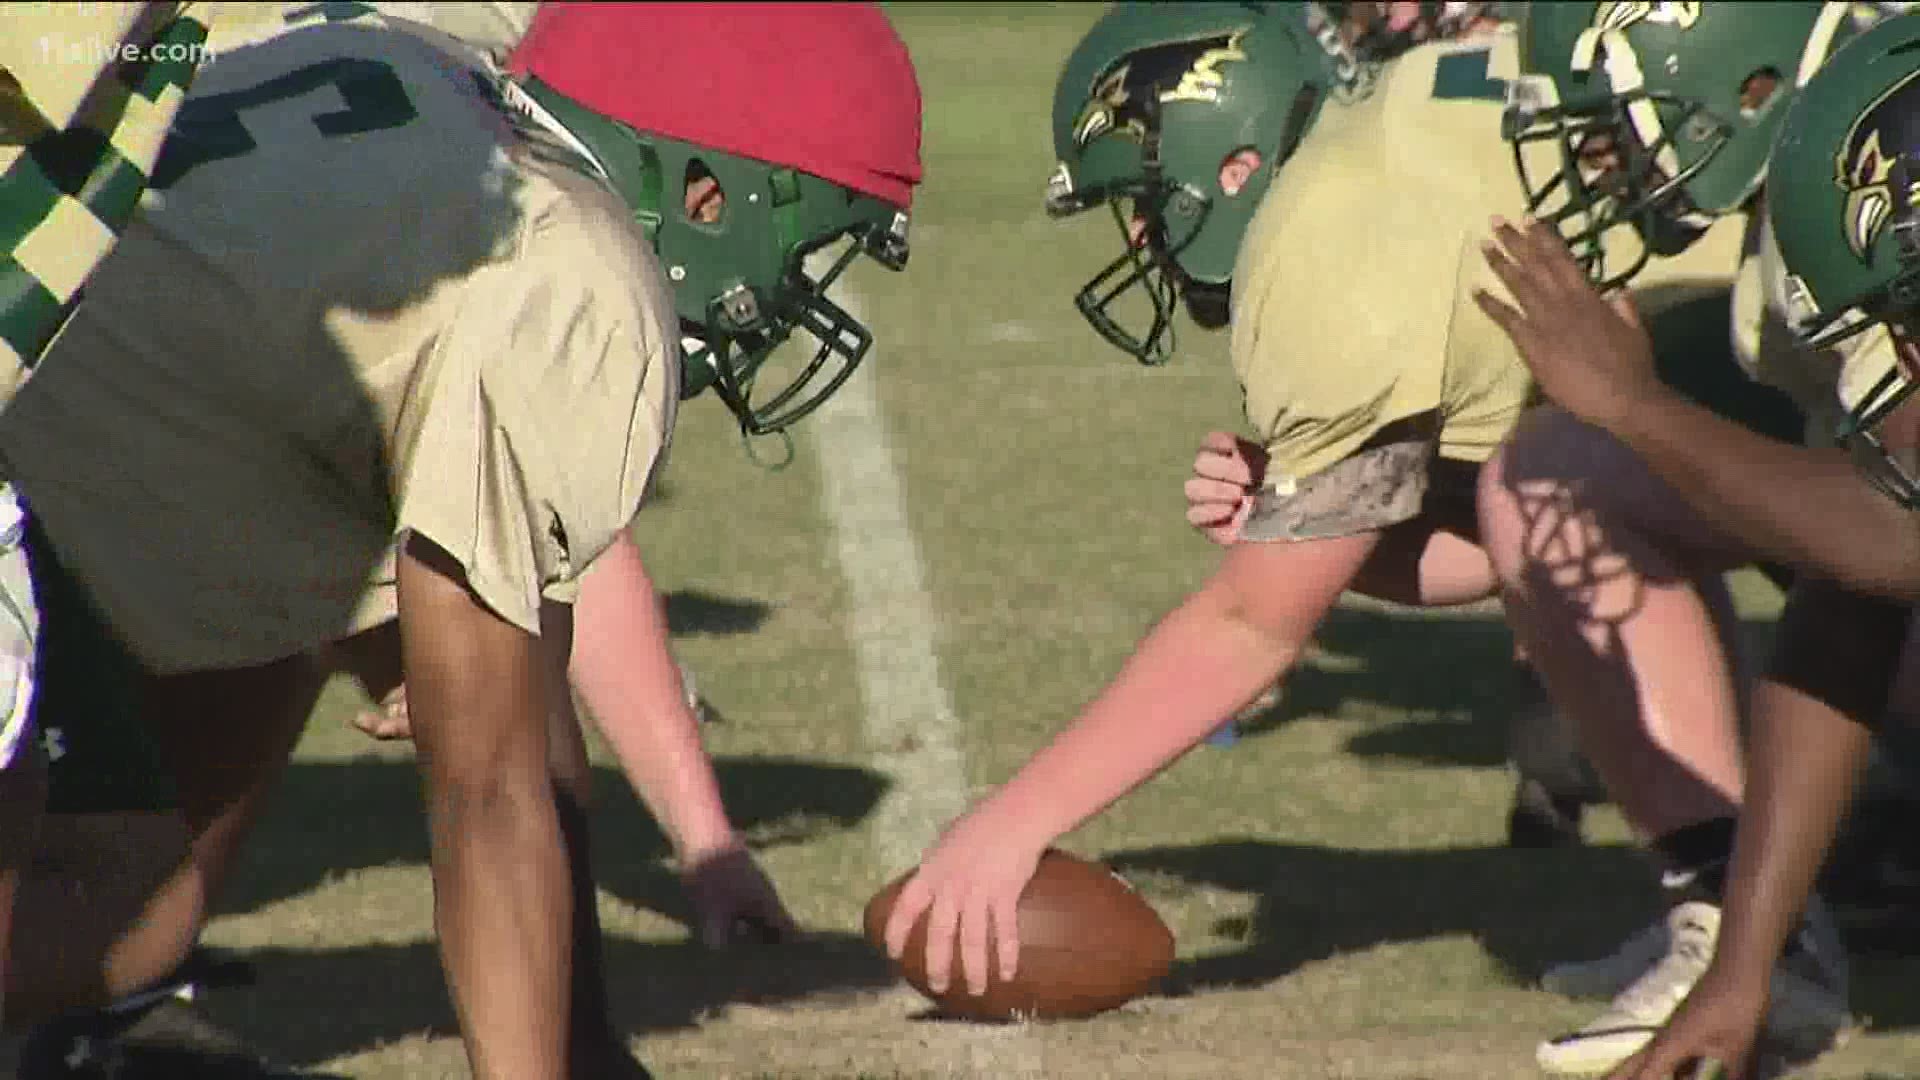 Georgia high schools are returning to voluntary workouts starting June 8. Fulton County has pushed theirs back to June 15 to give themselves more time to prepare.